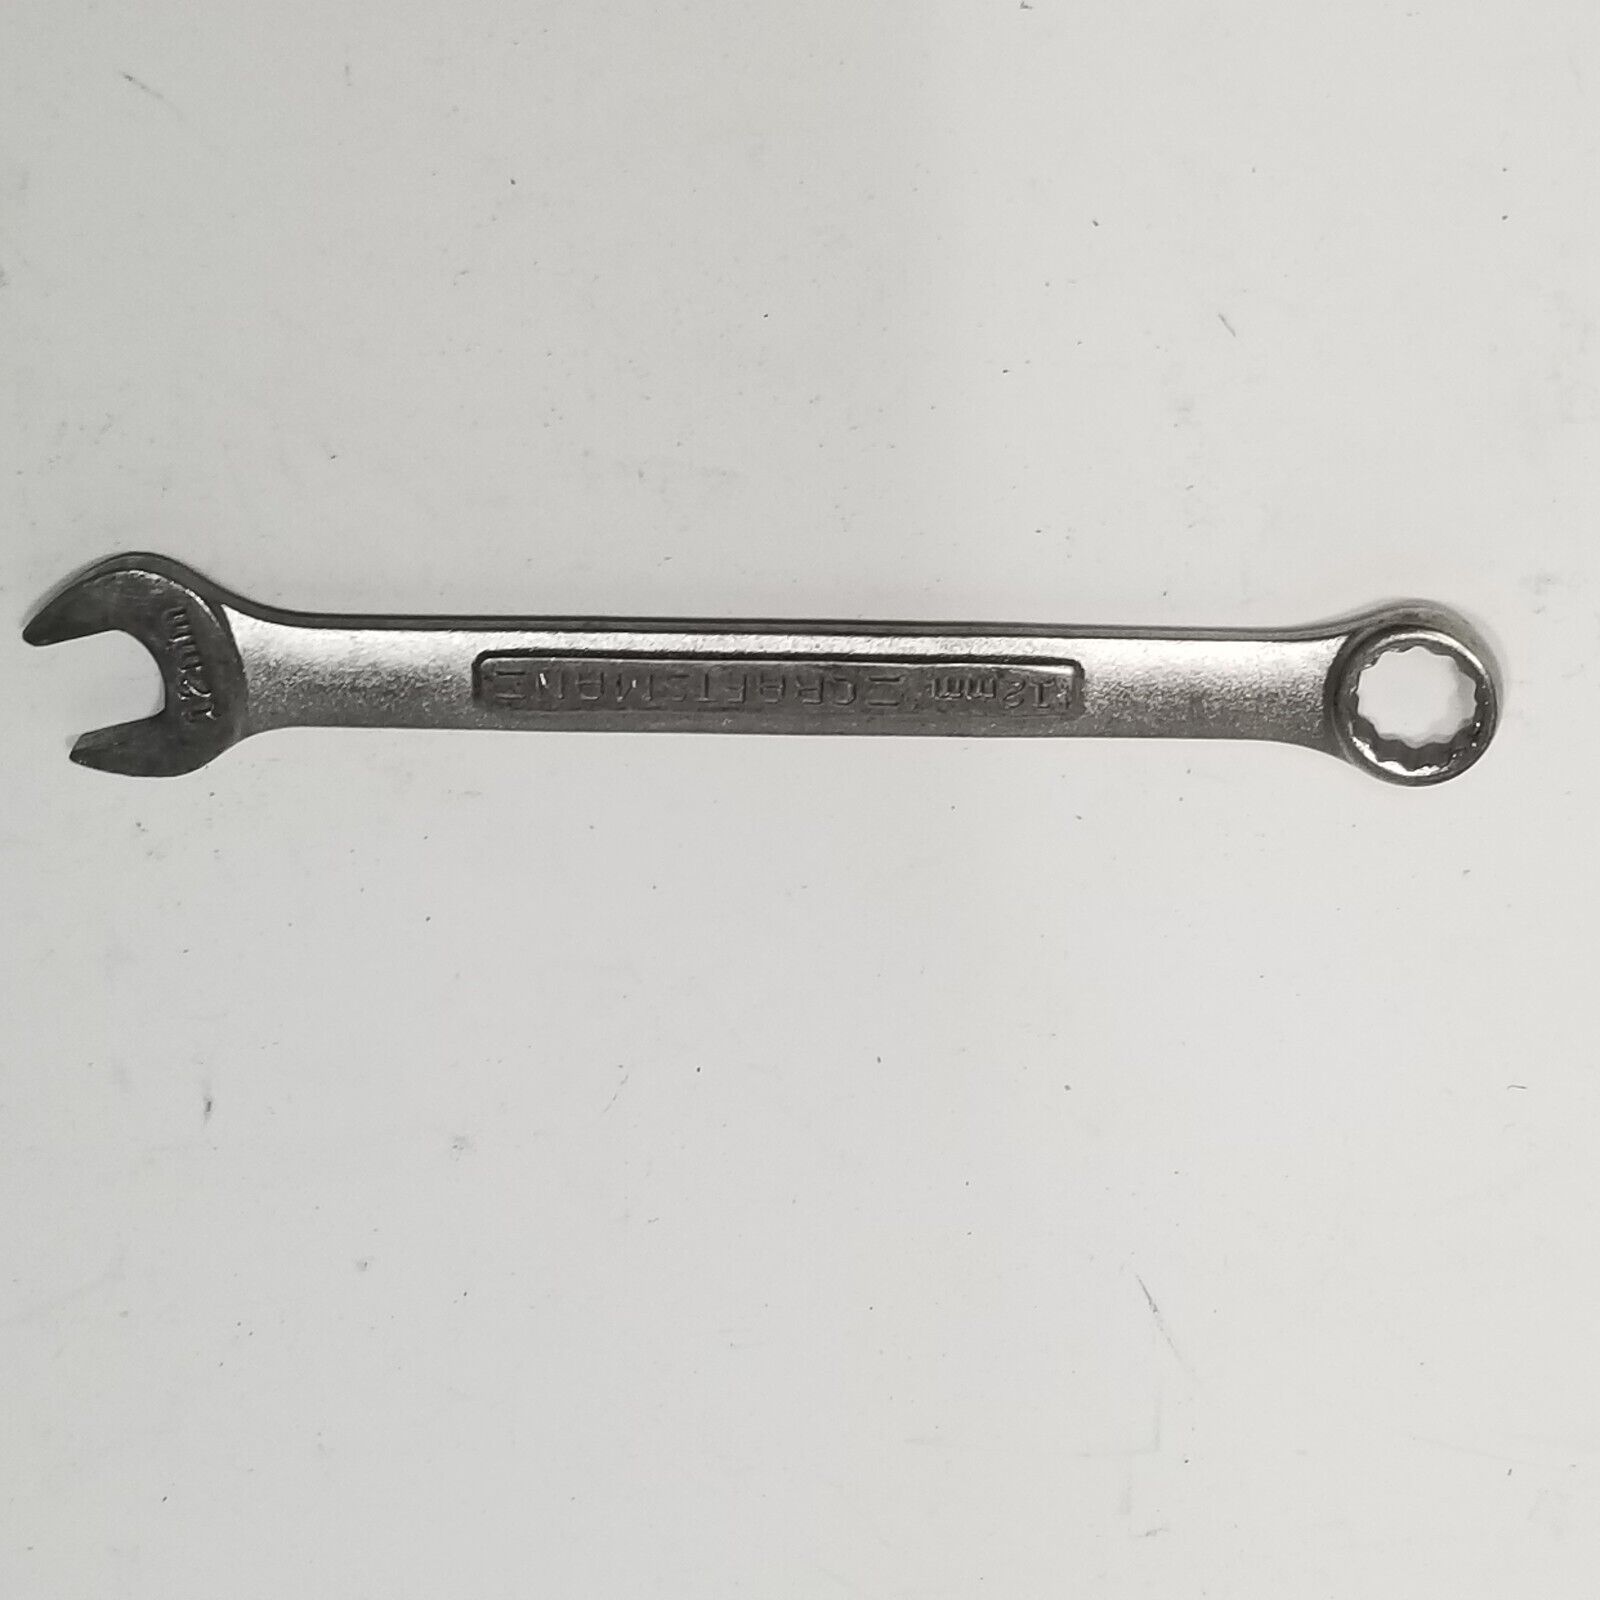 Vintage Craftsman No.-VA- 42916 = 12mm 12 Point Combination Wrench Made in USA